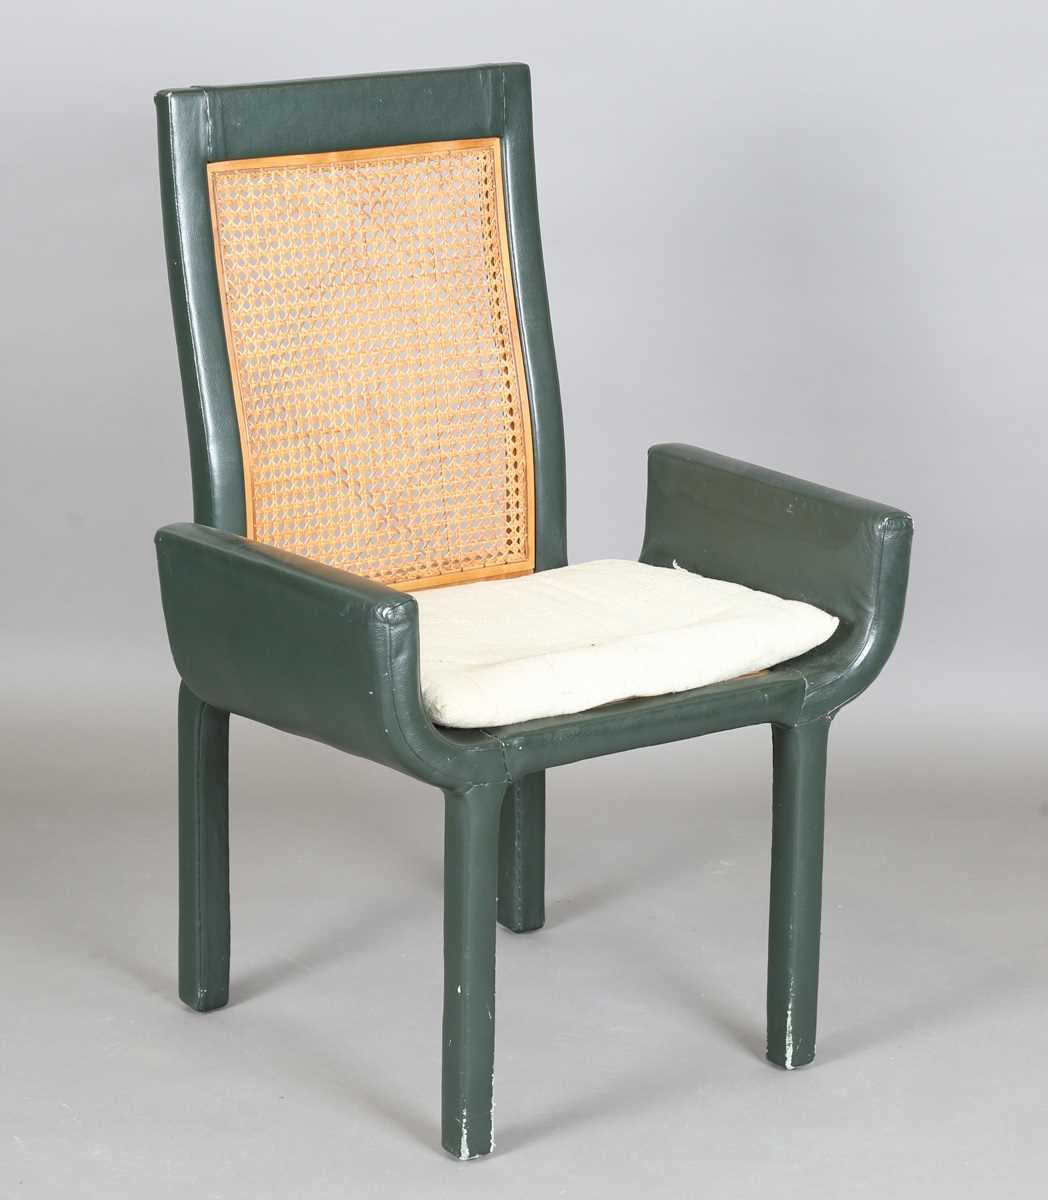 A John Makepeace satinwood and green leather covered armchair with a caned seat and back panel,